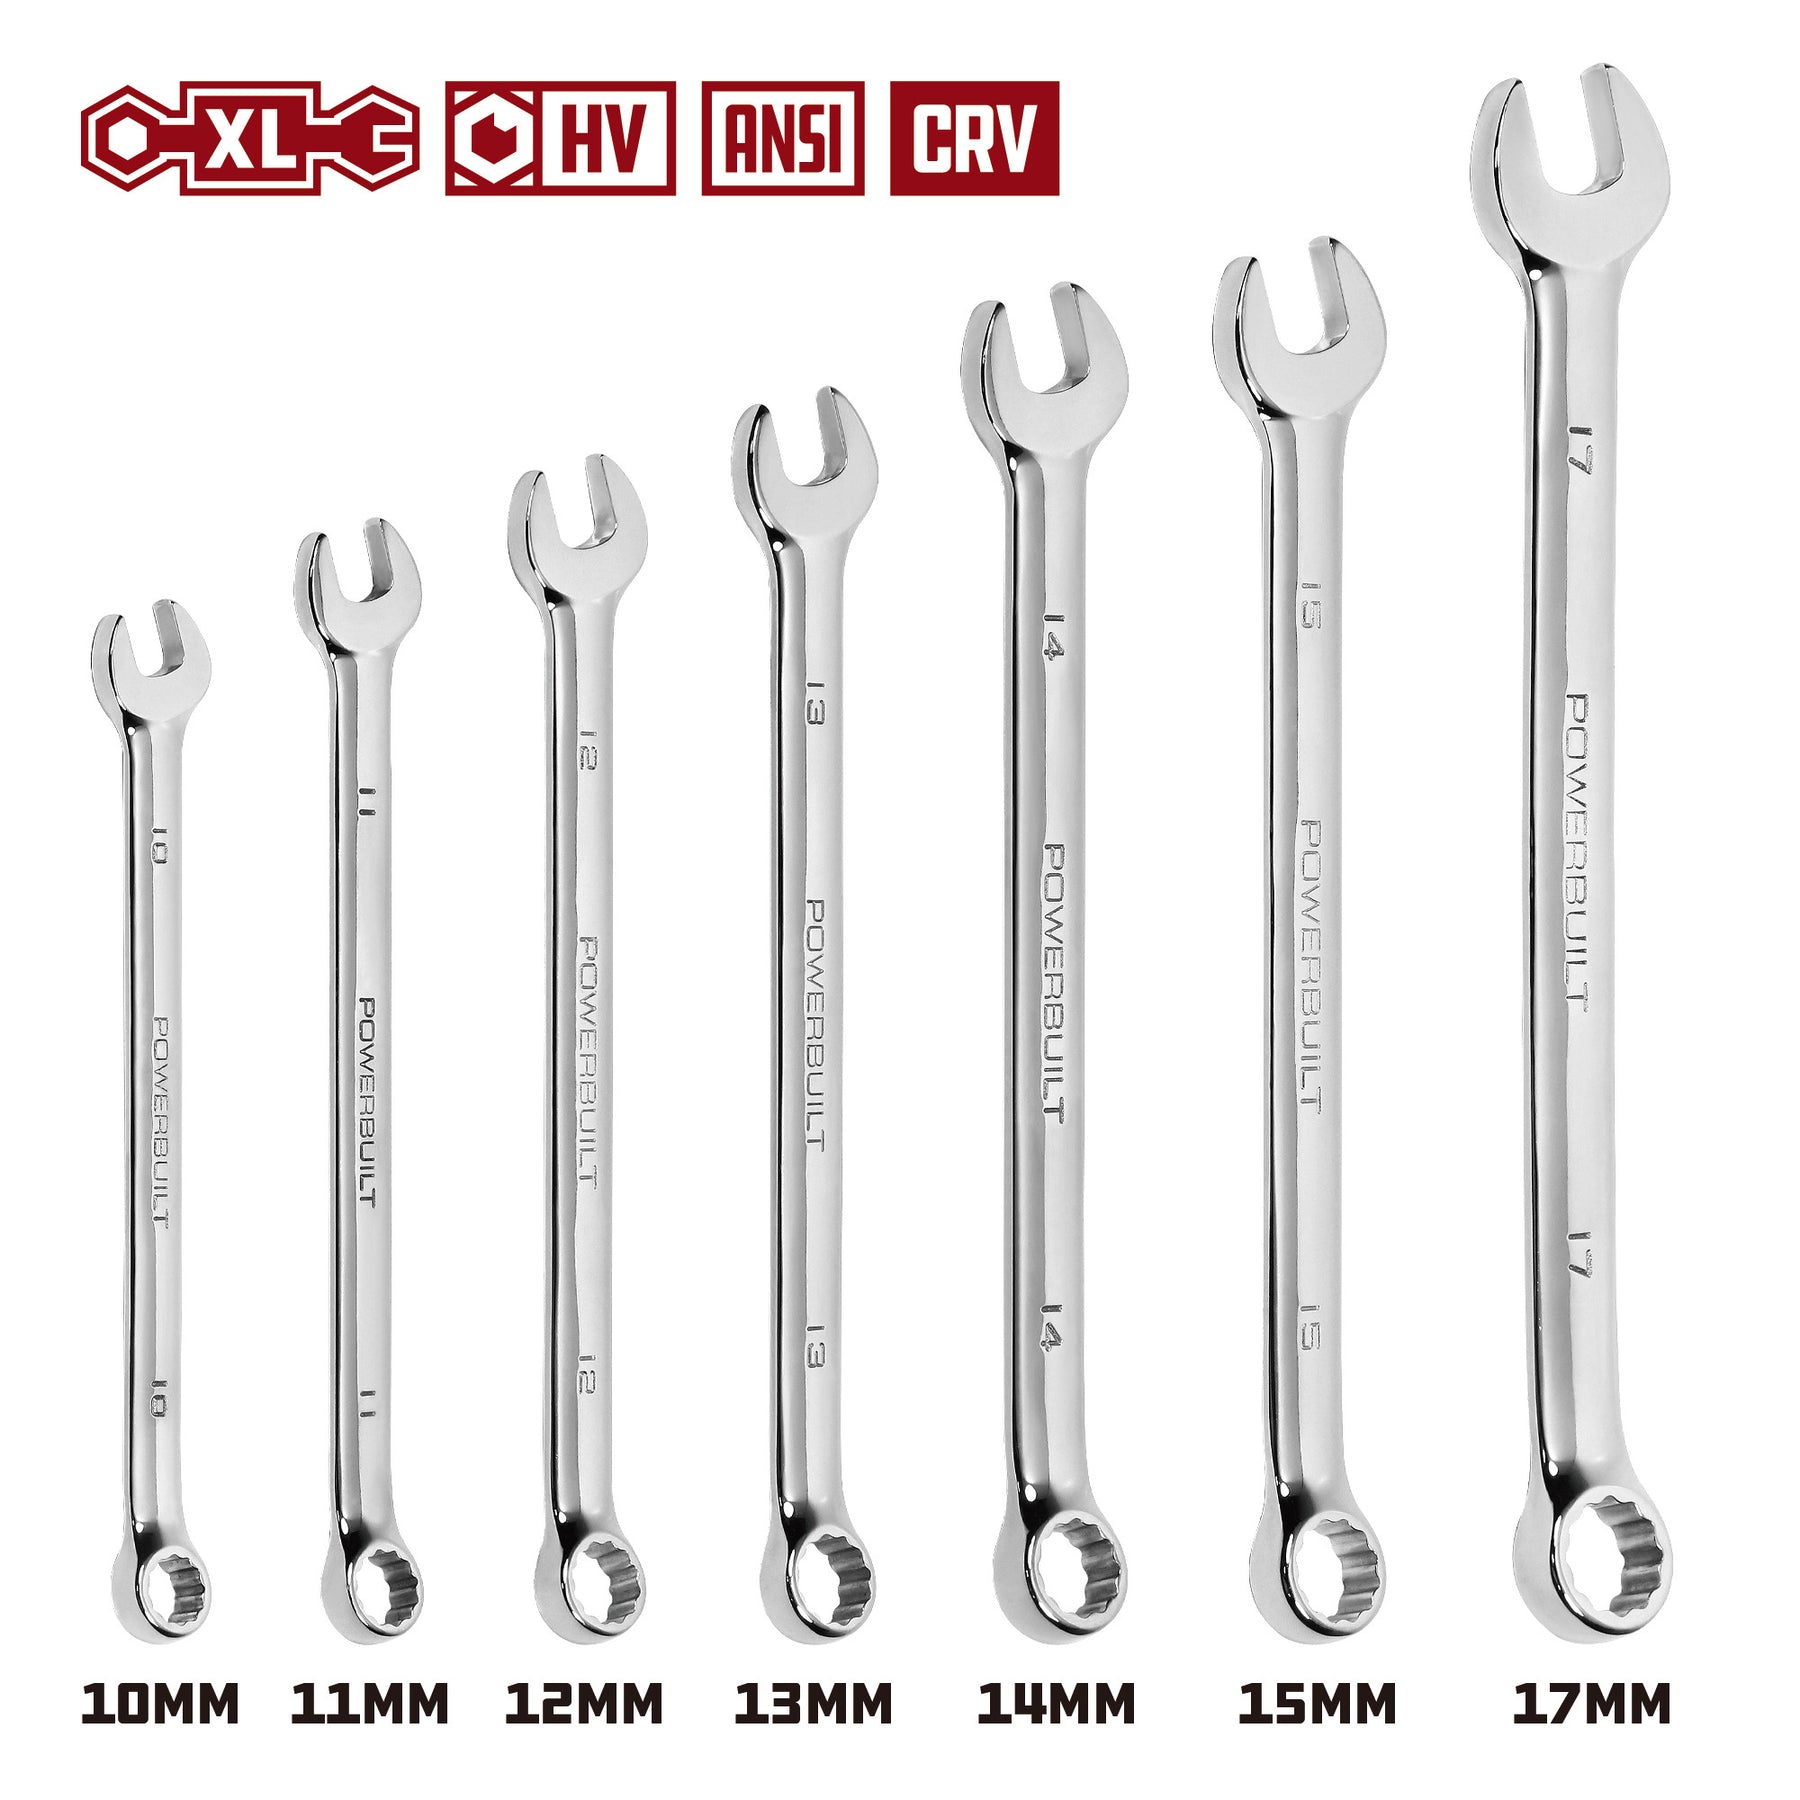 Mixed Wrench Set // 6 Pieces // 10mm, 11mm, 12mm, 3/8”, 7/16”, 1/2